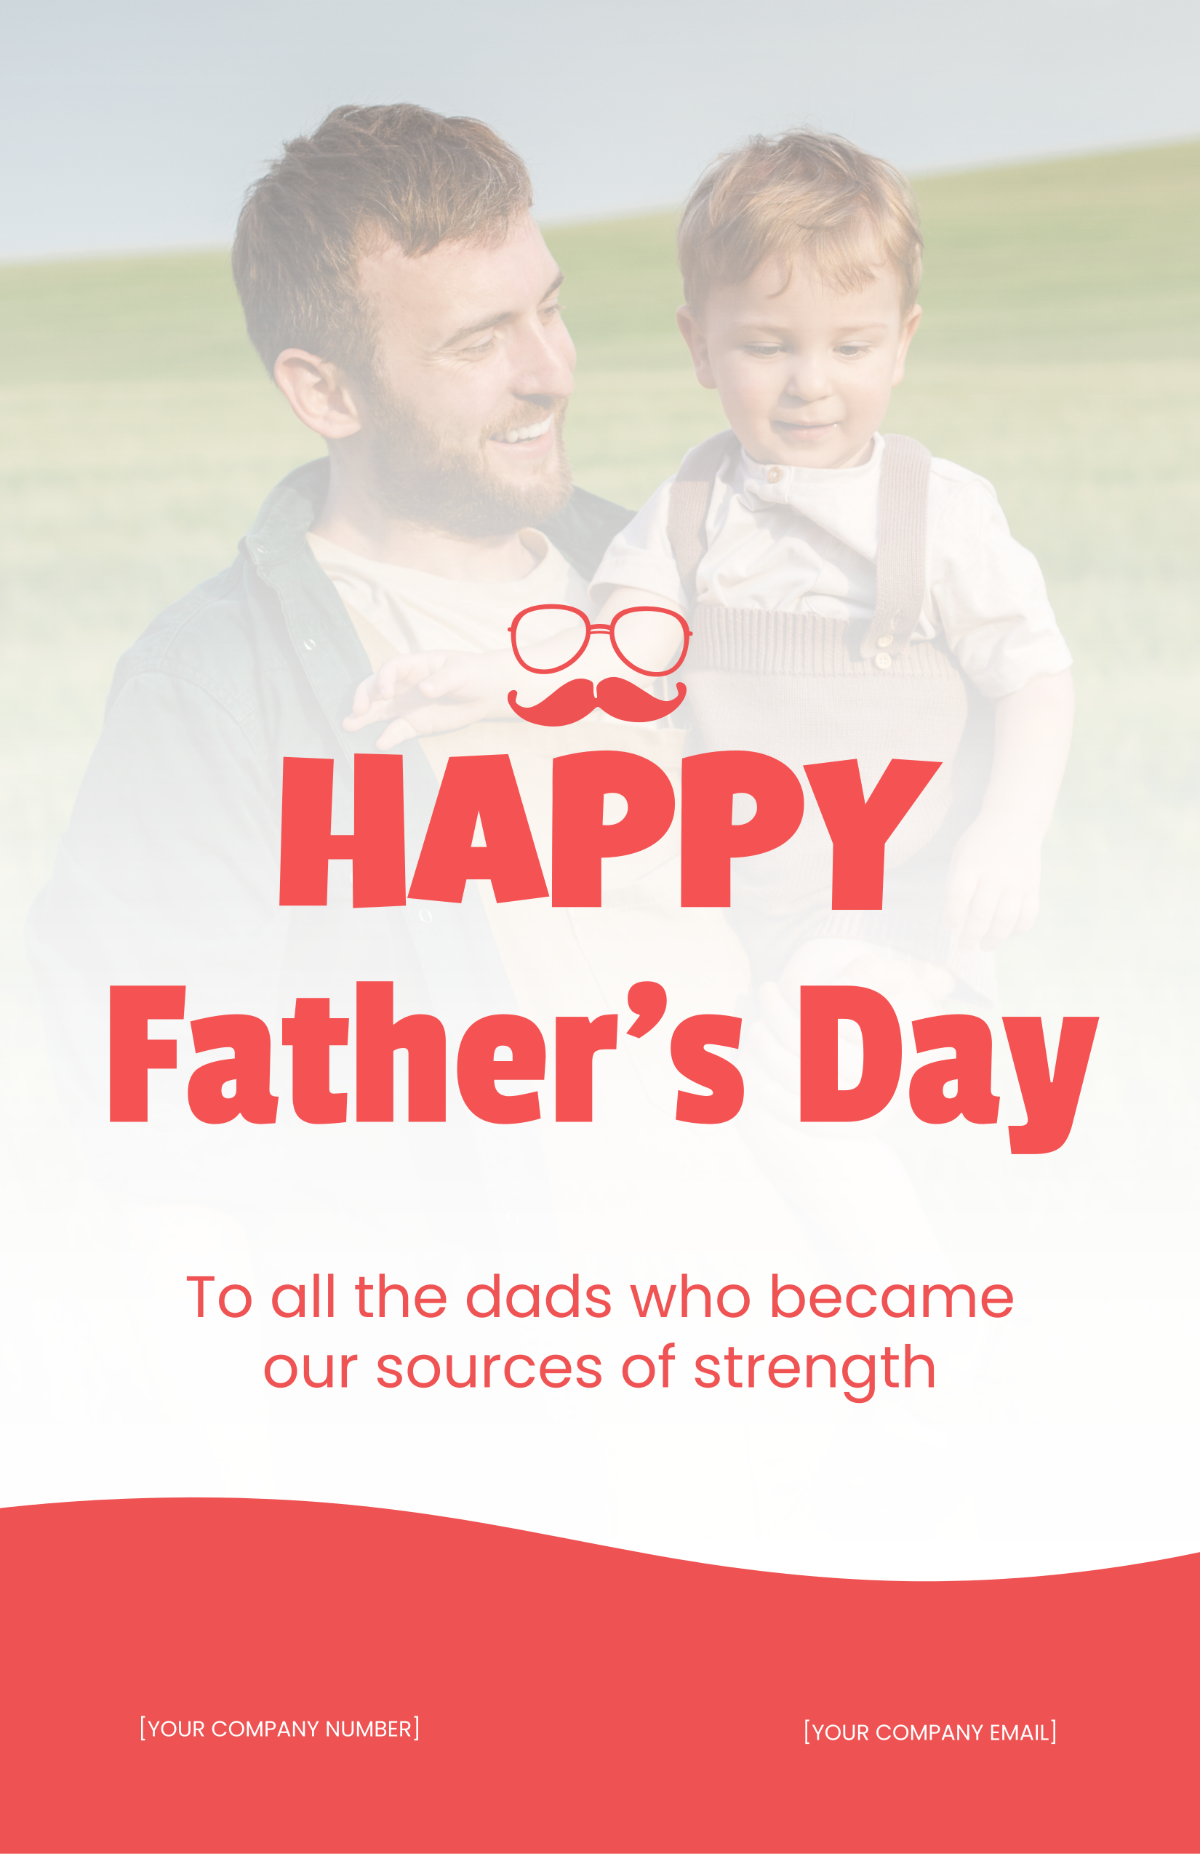 Father's Day Hospital Poster